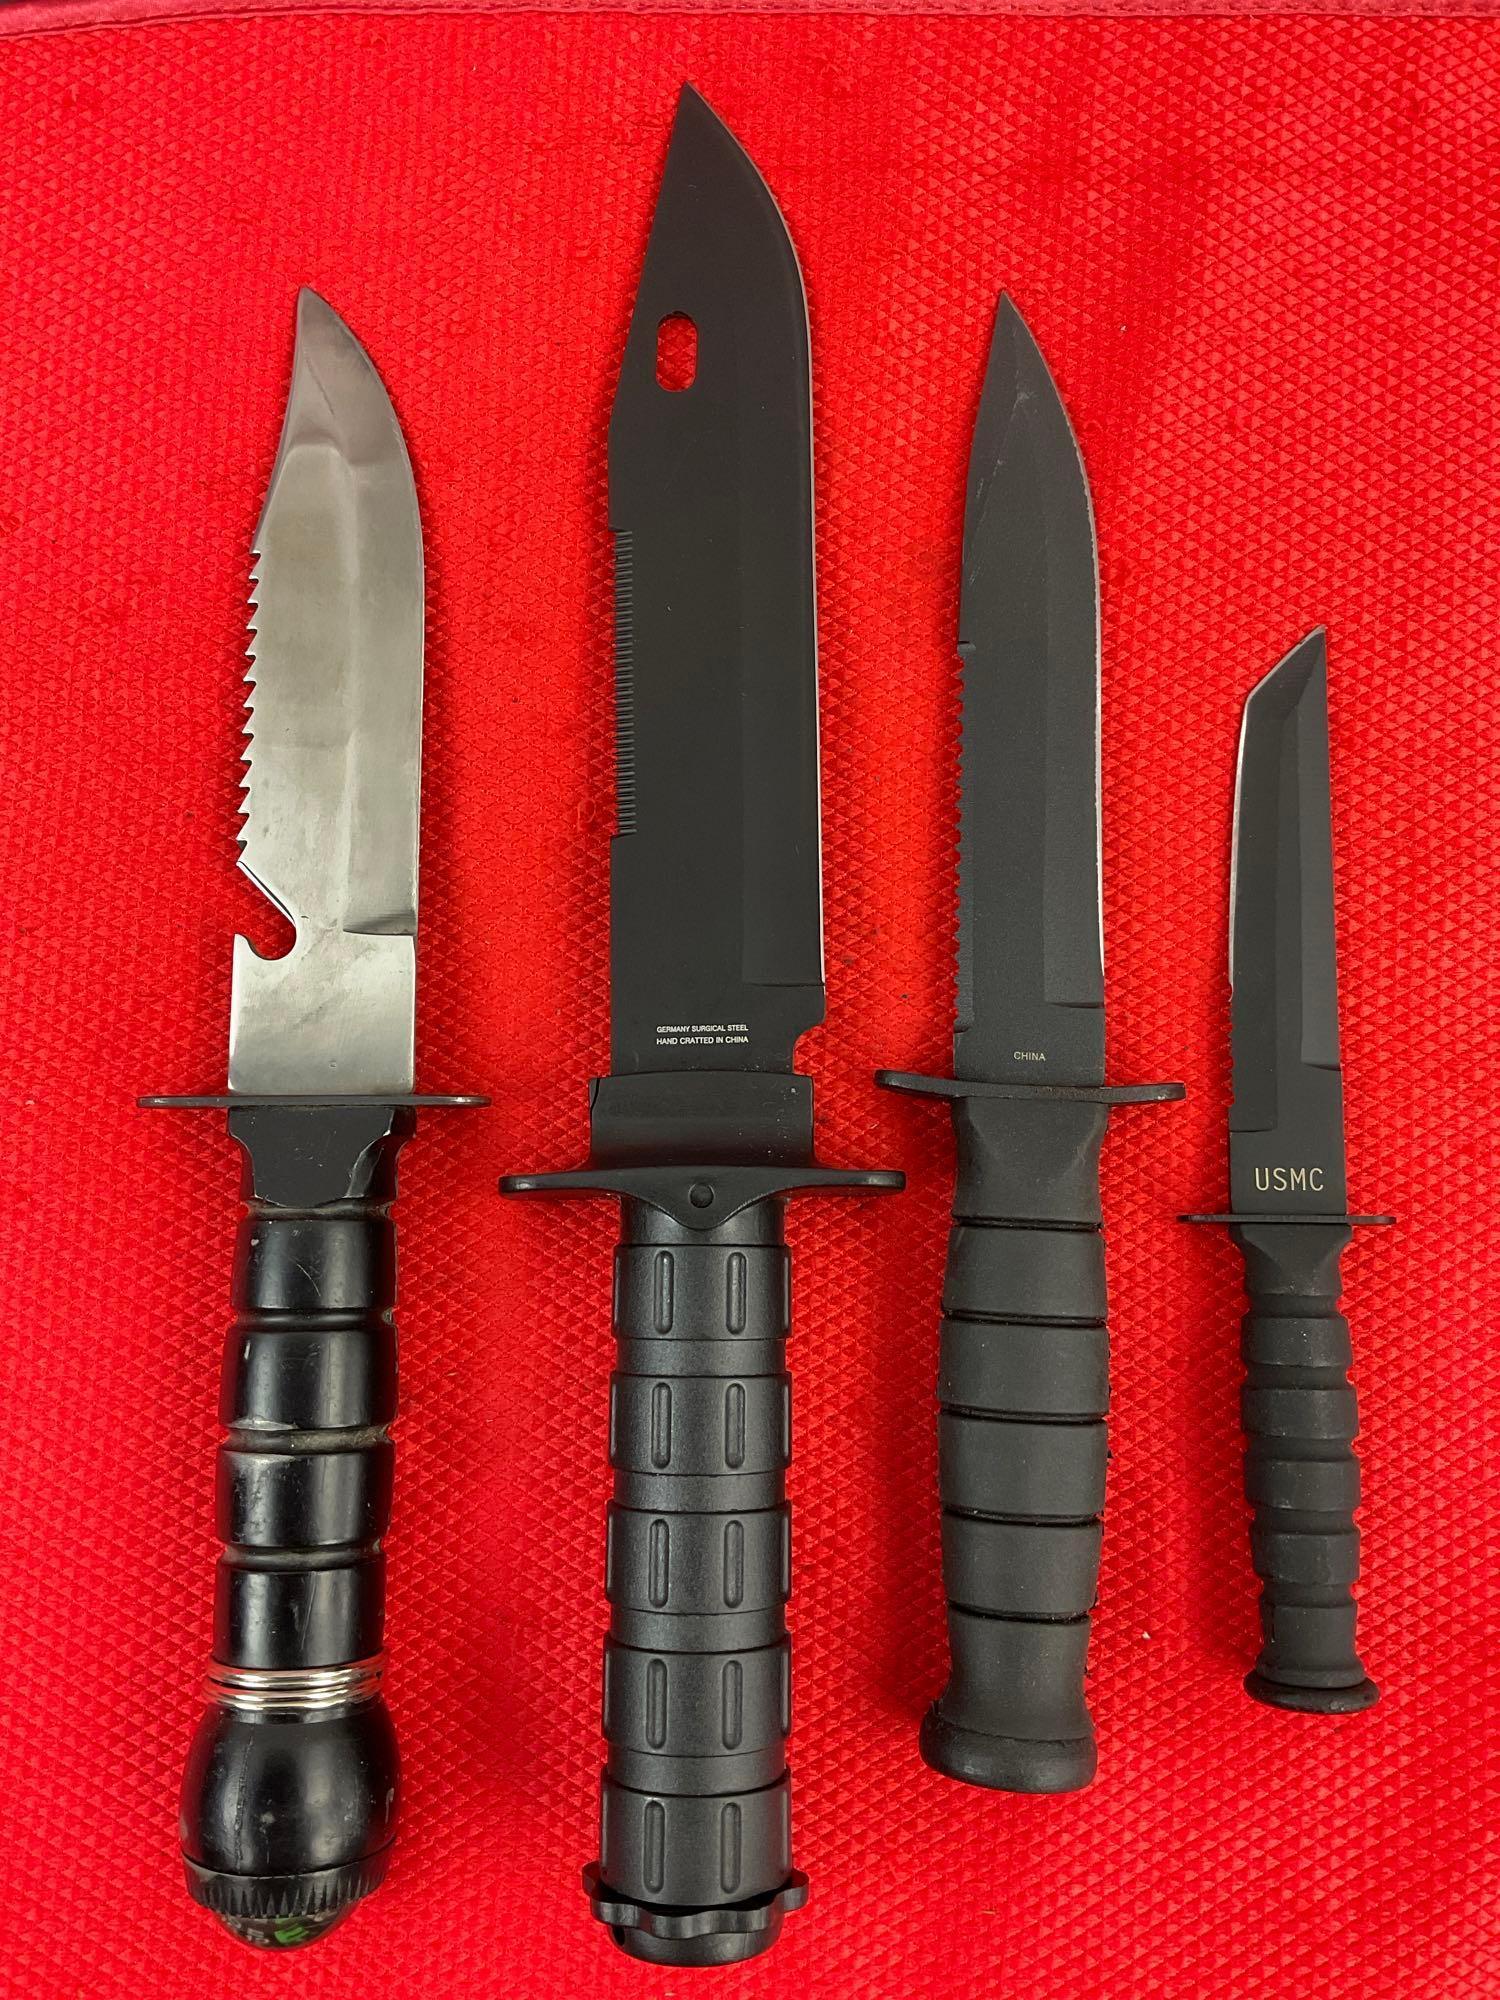 4 pcs Steel Fixed Blade Bowie Knives w/ Sheathes. 1x Hero Edge, 1x Outback, 1x D.O.T.T. See pics.